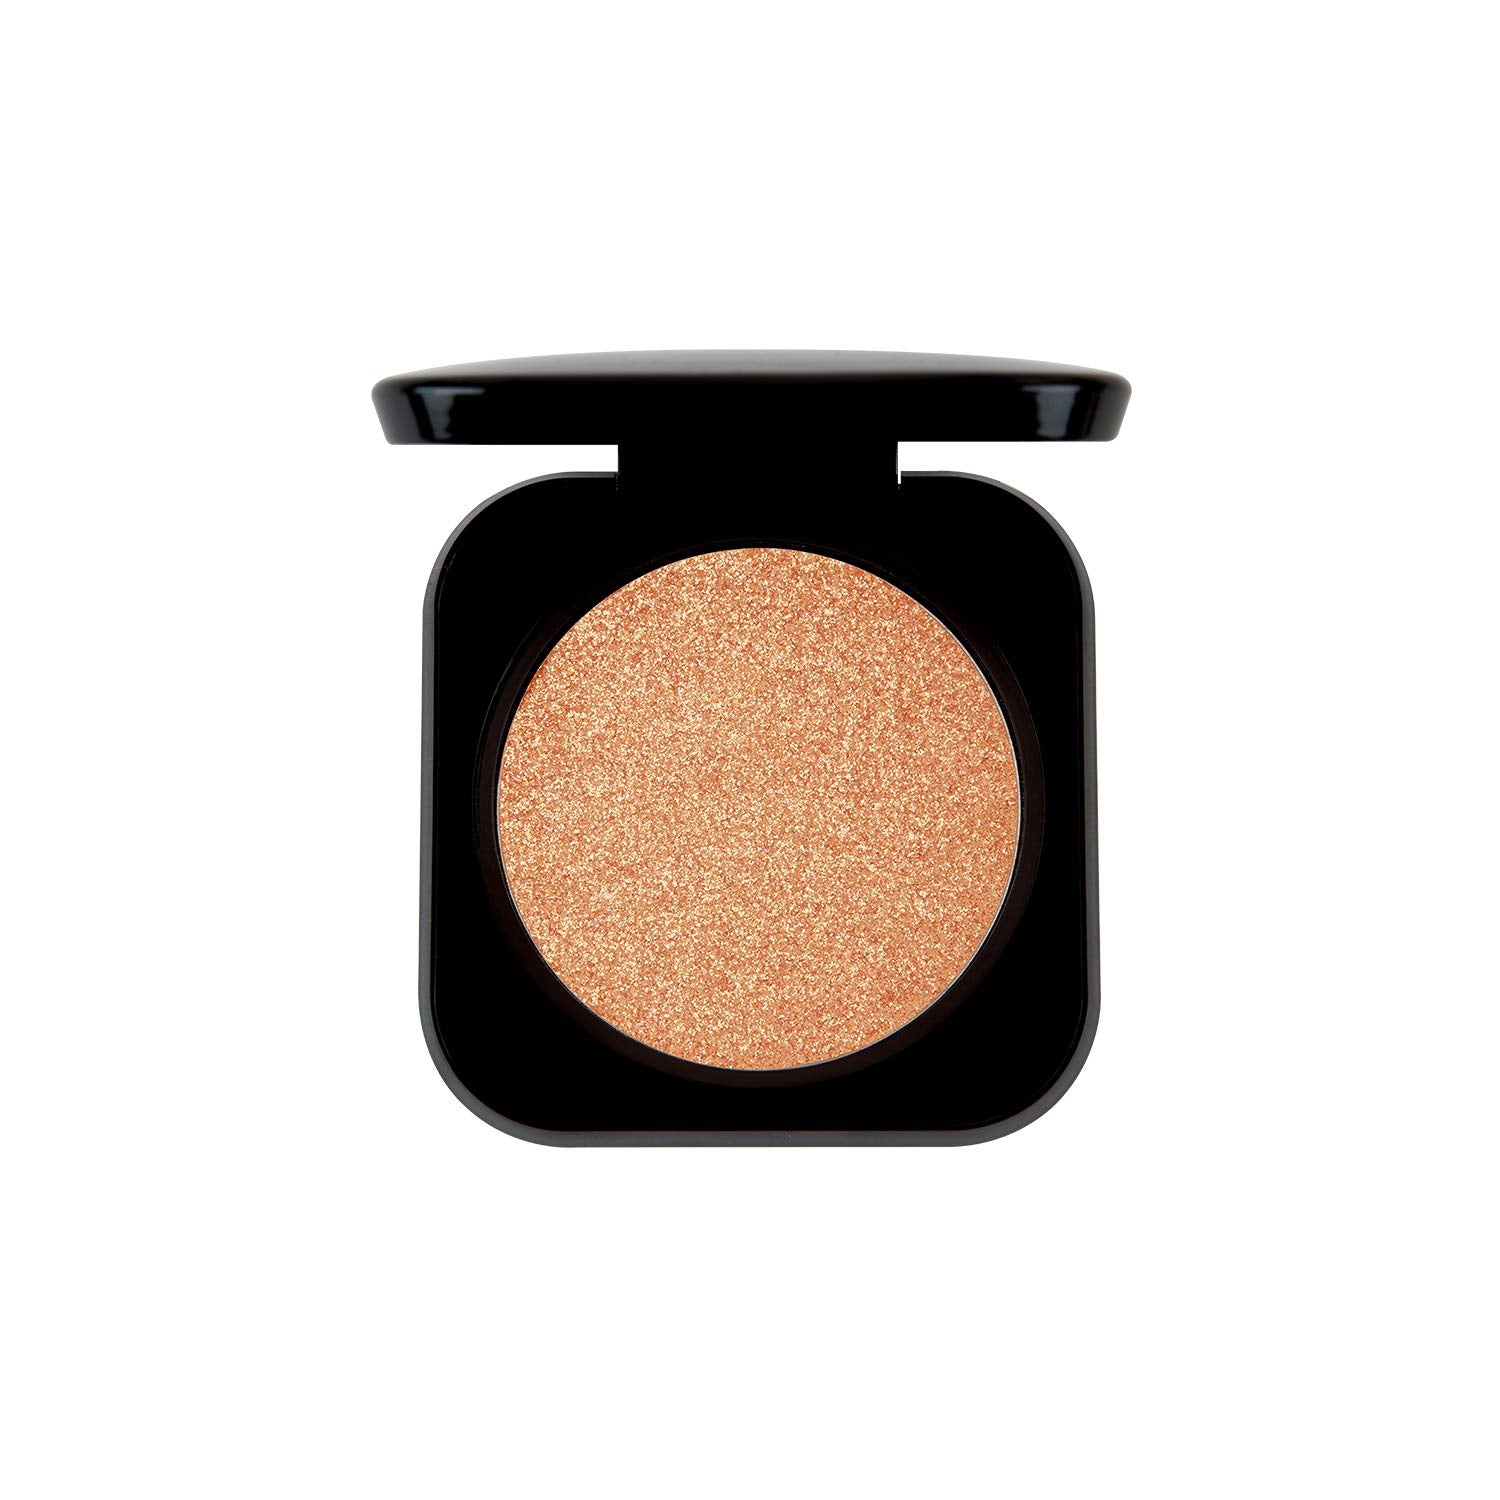 PAC Master Glow Highlighter - 02 (Prom Queen) PAC